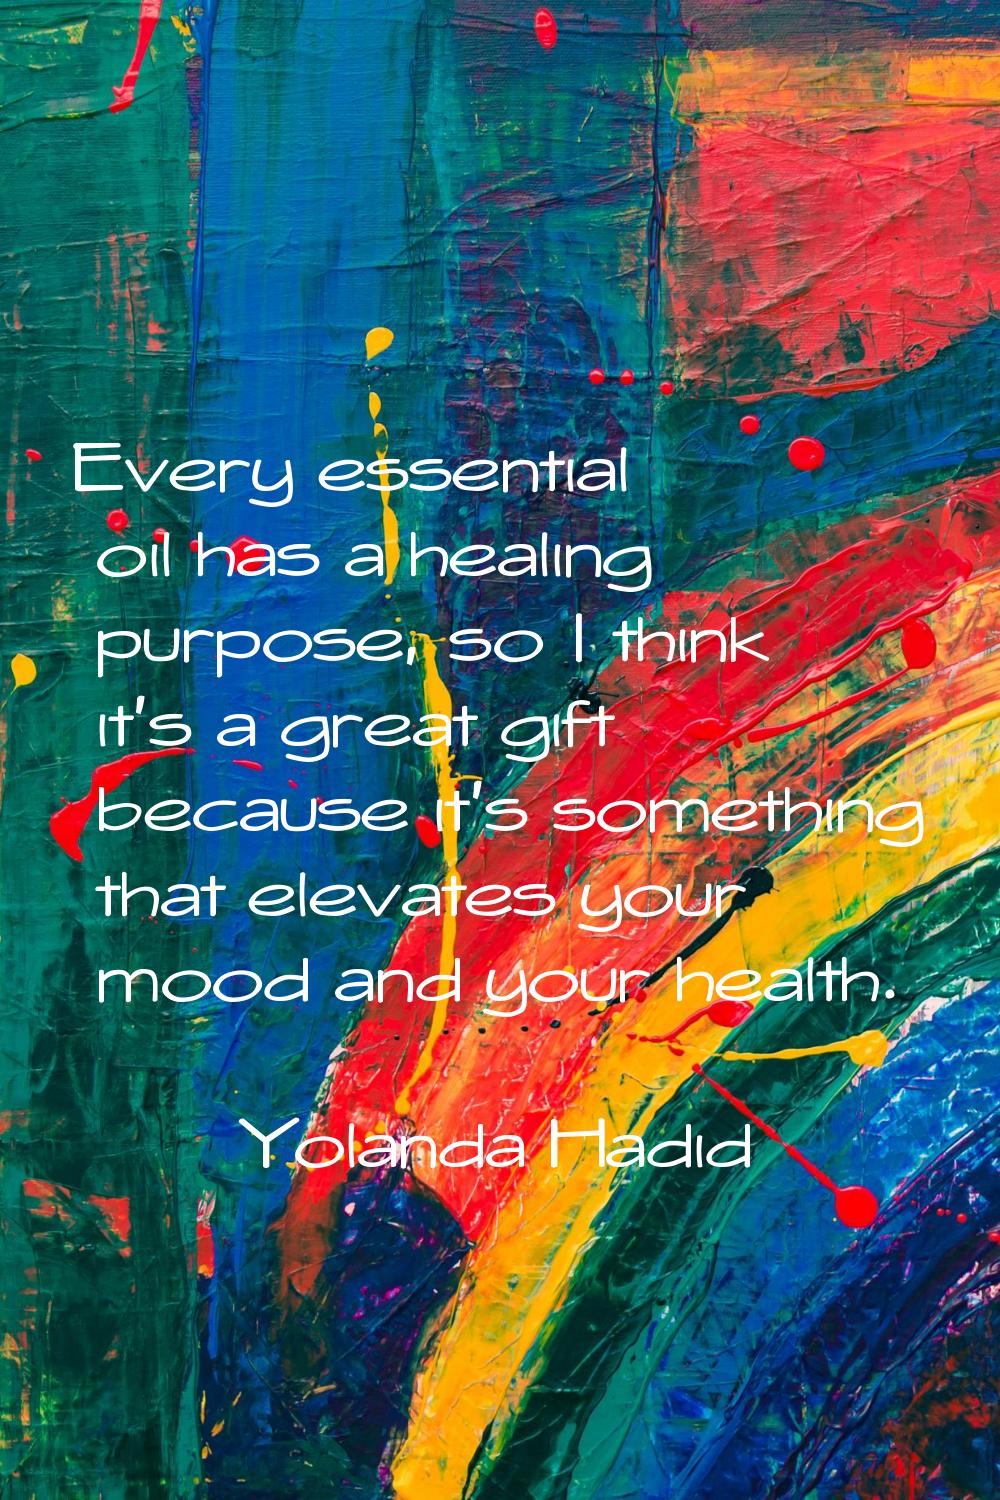 Every essential oil has a healing purpose, so I think it's a great gift because it's something that